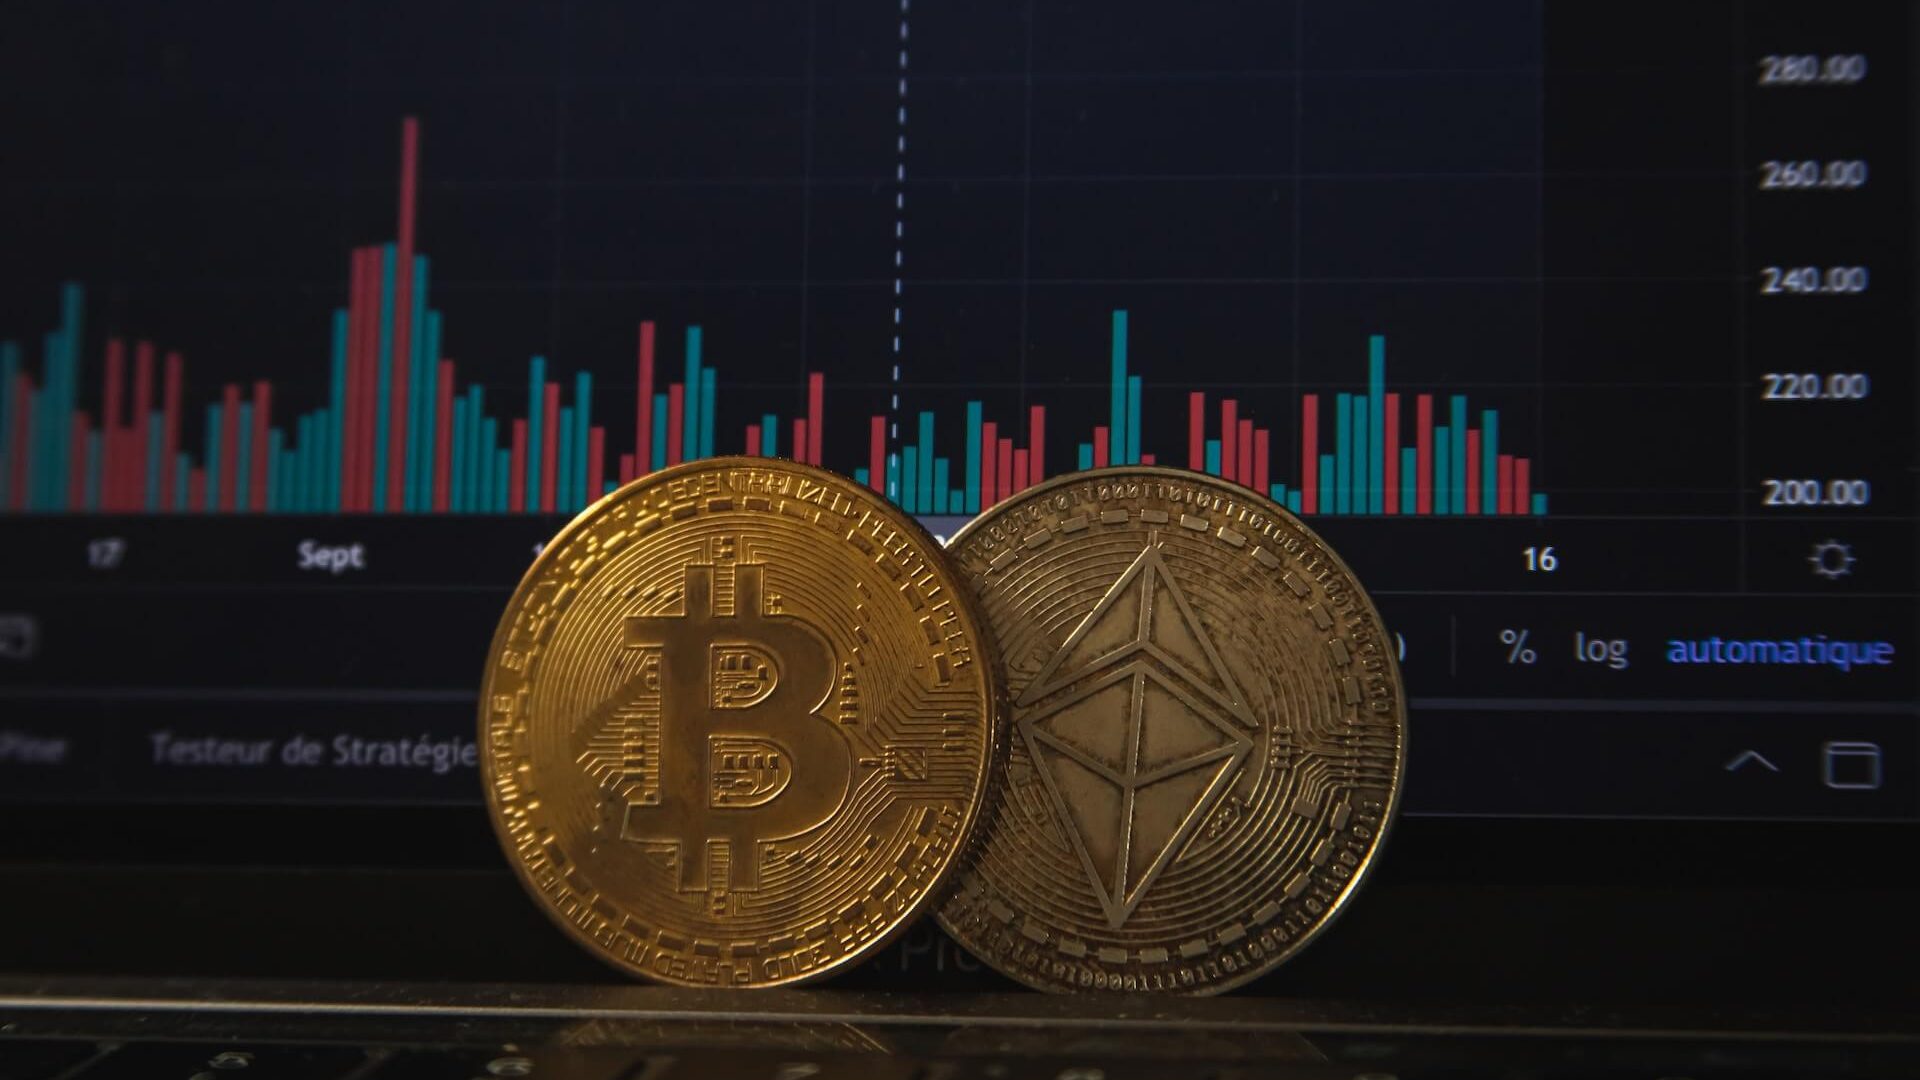 Physical Bitcoin and Ethereum coins with a computer screen showing cryptocurrency market data.